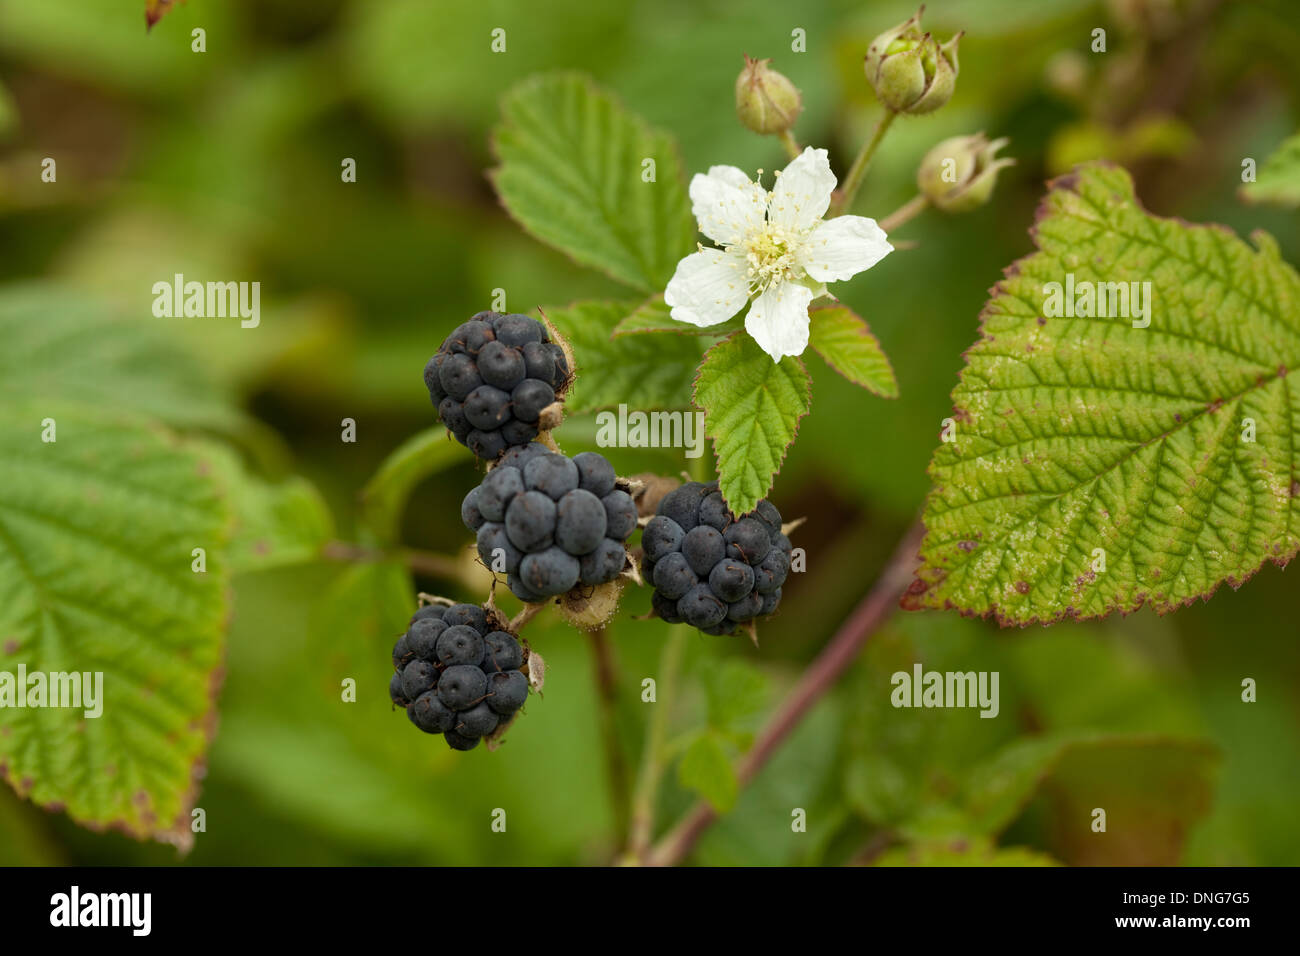 blackberry bush with white flower and fruits Stock Photo